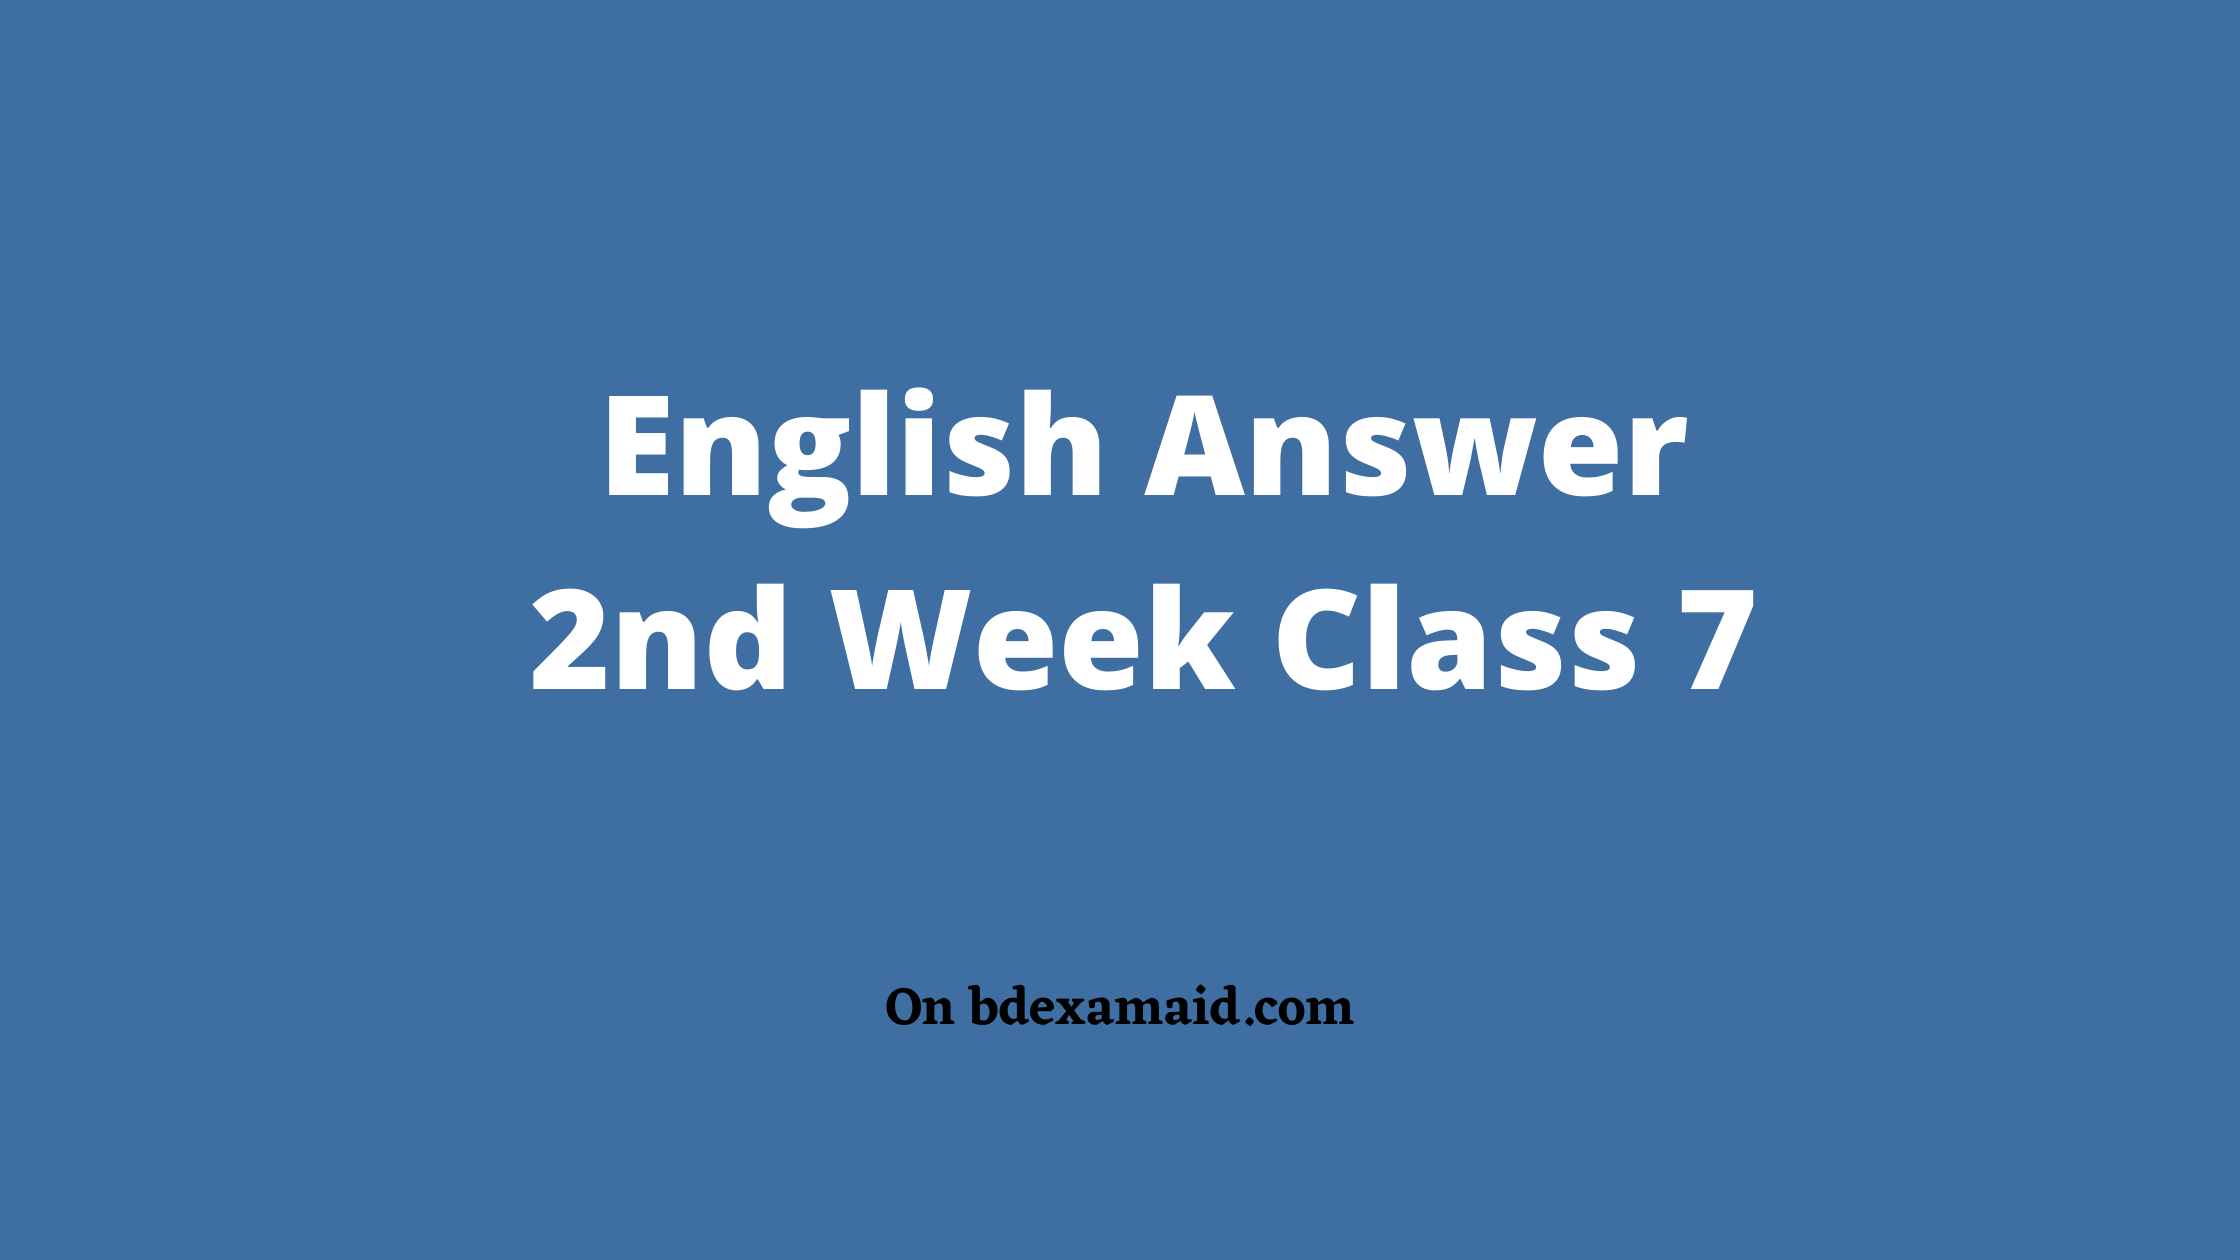 class-7-english-assignment-2nd-week-2021-answer-bd-exam-aid